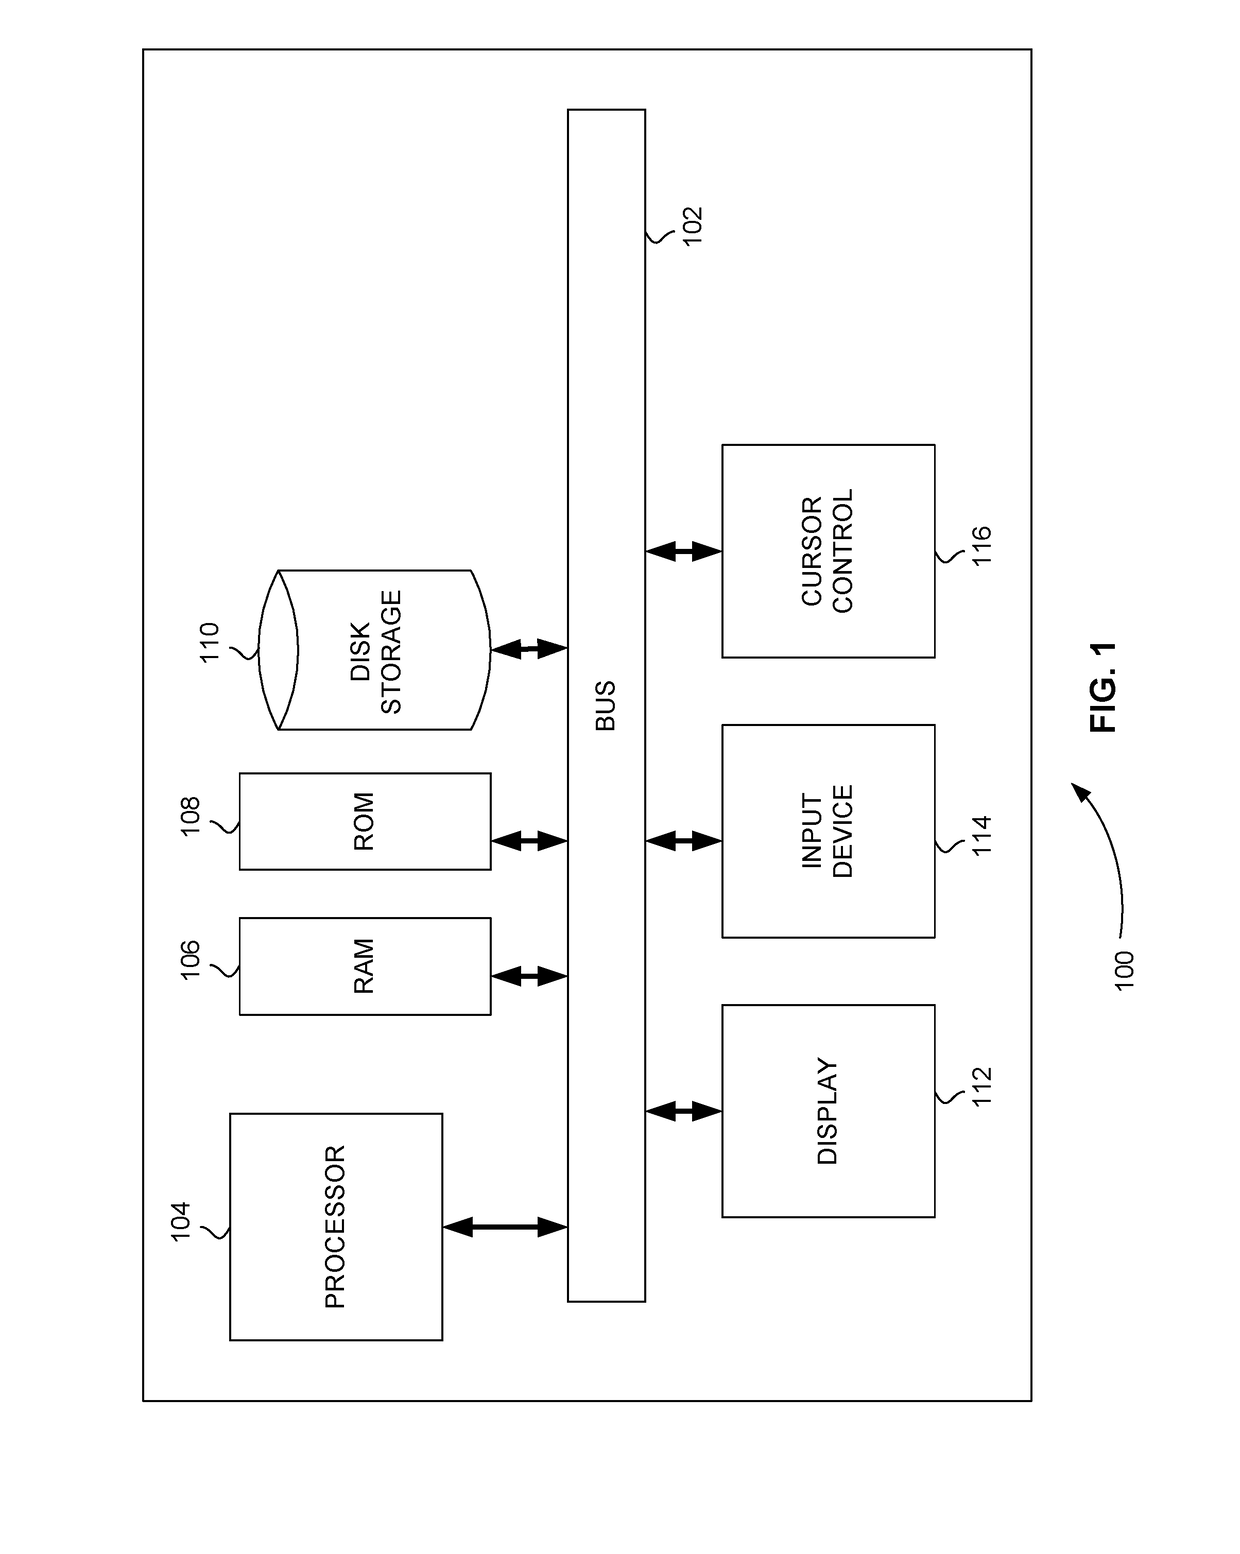 Method for Converting Mass Spectral Libraries into Accurate Mass Spectral Libraries